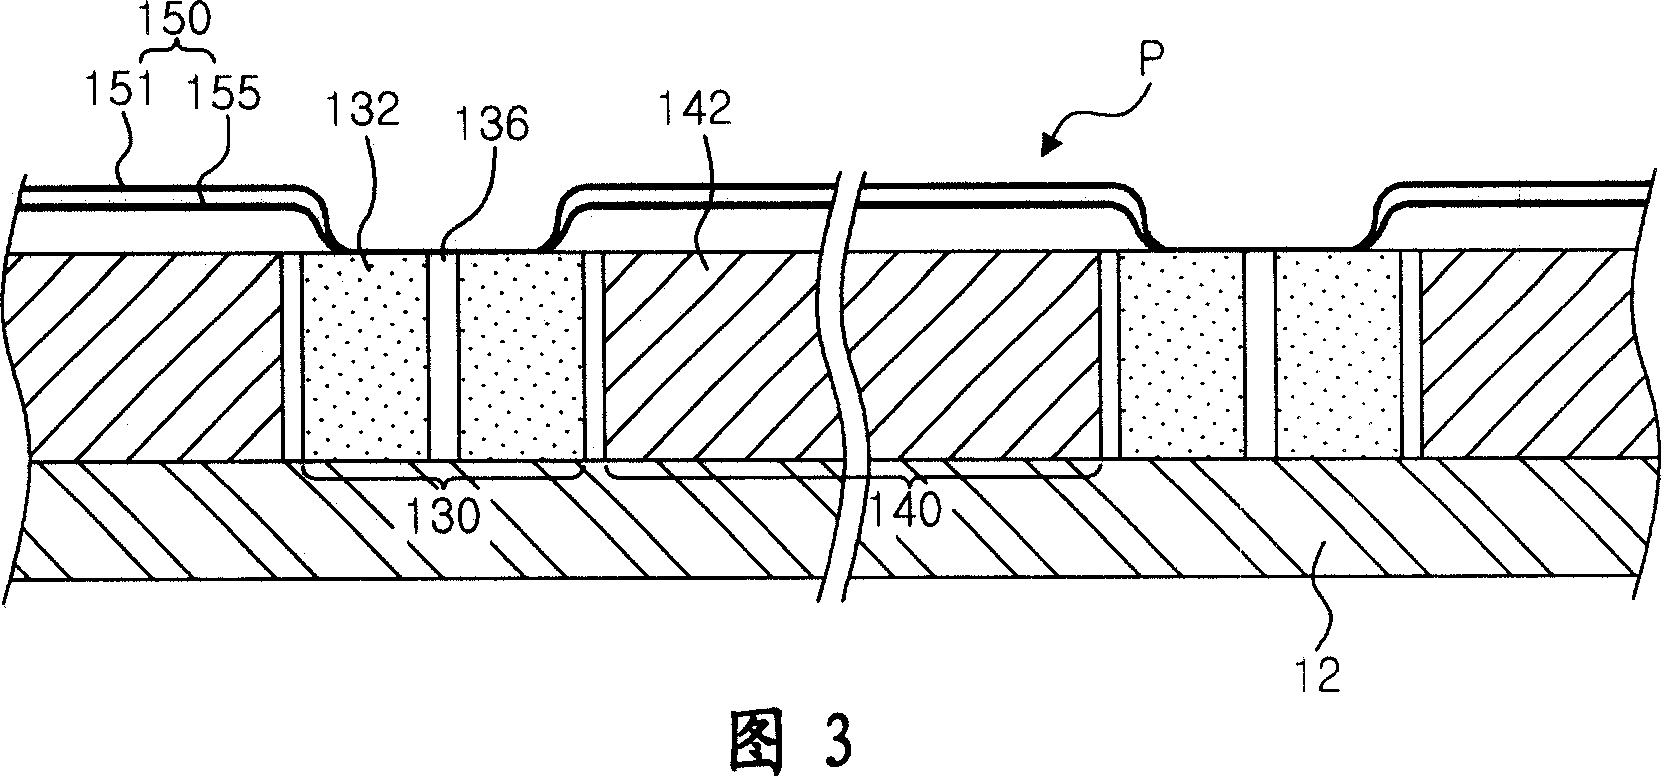 Liquefied natural gas storage tank having improved insulation structure and method of manufacturing the same